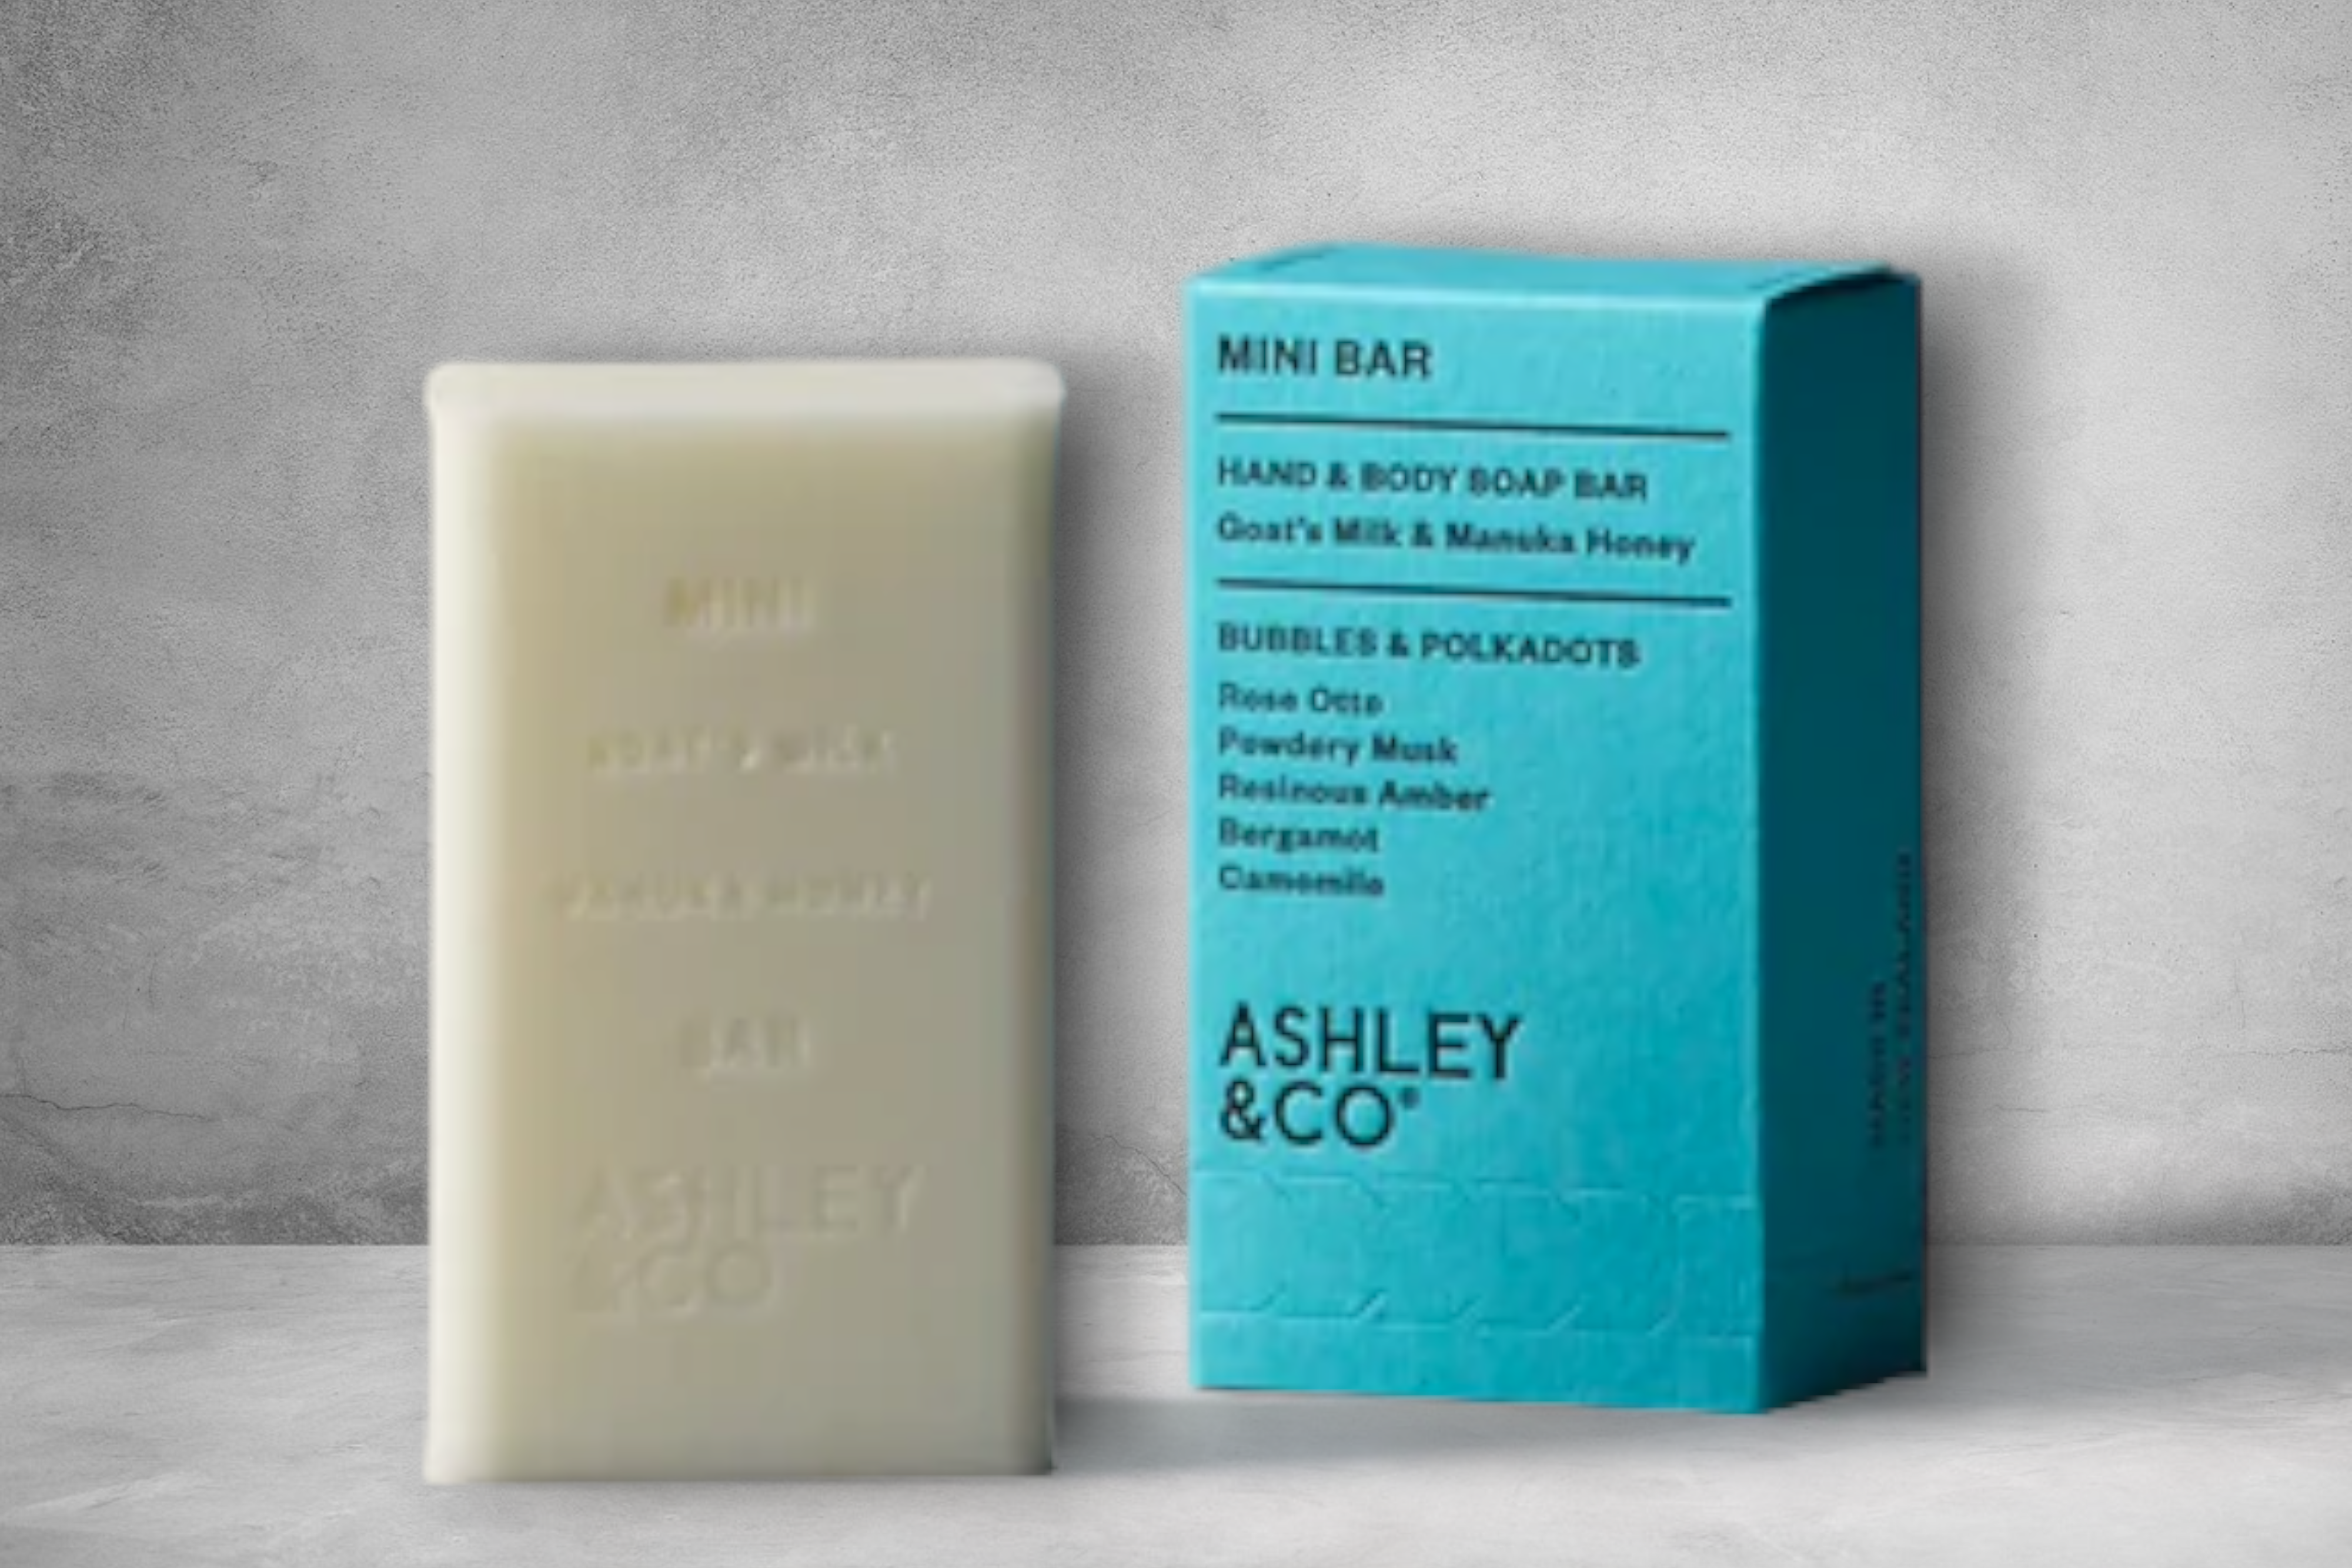 A Bubbles & Polkadots Mini Bar of soap next to its vibrant blue packaging, highlighting the natural ingredients and scents offered by the Ashley & Co brand, featuring Manuka and goats milk.